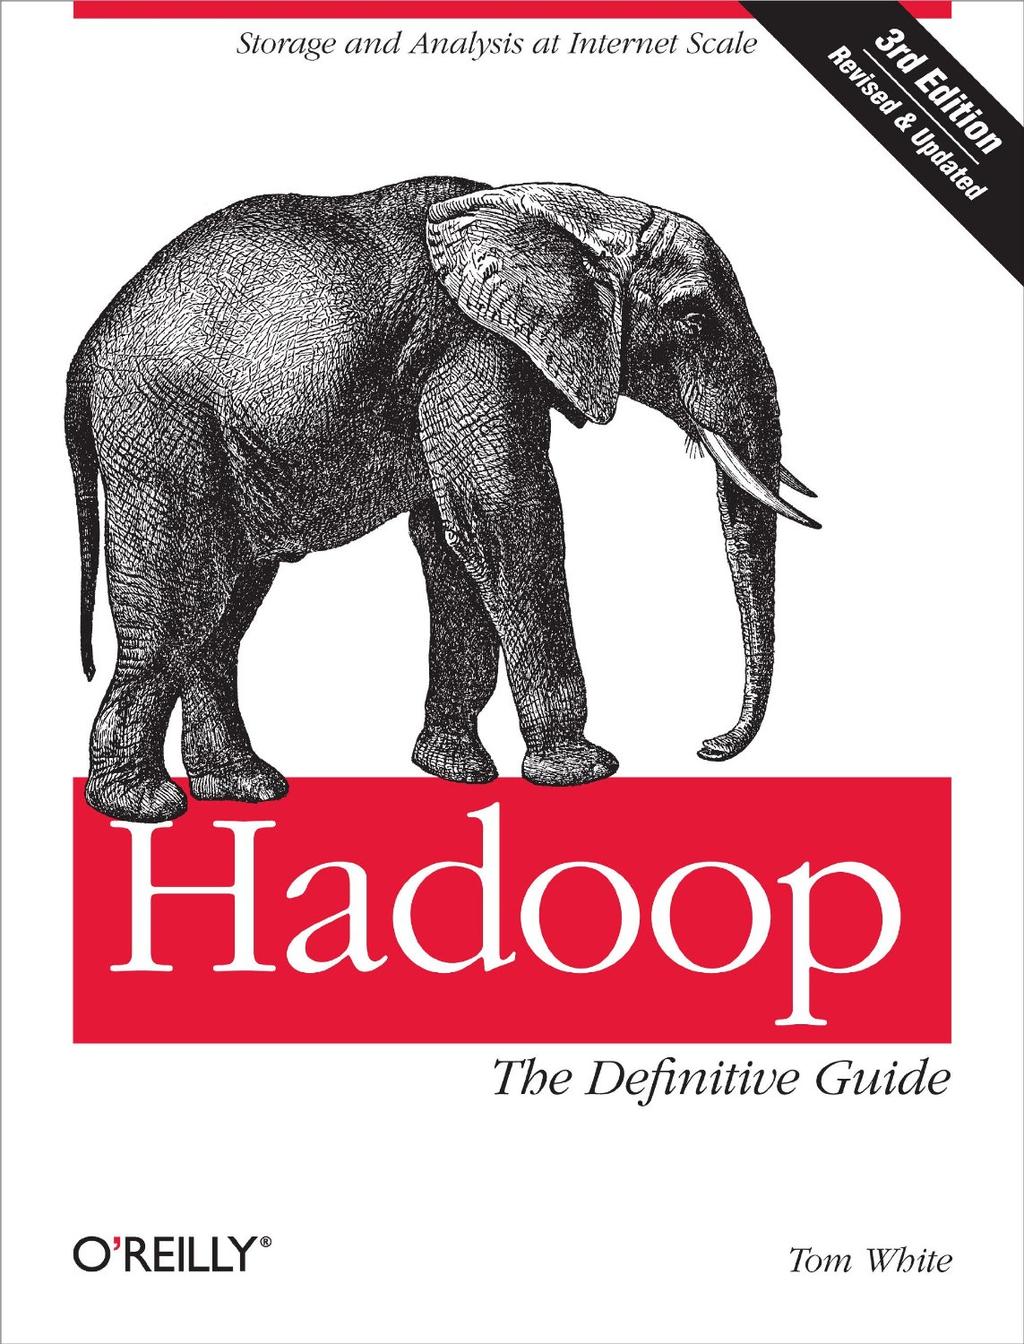 Hadoop, The Definitive Guide Version 3 is specified in the syllabus [12]